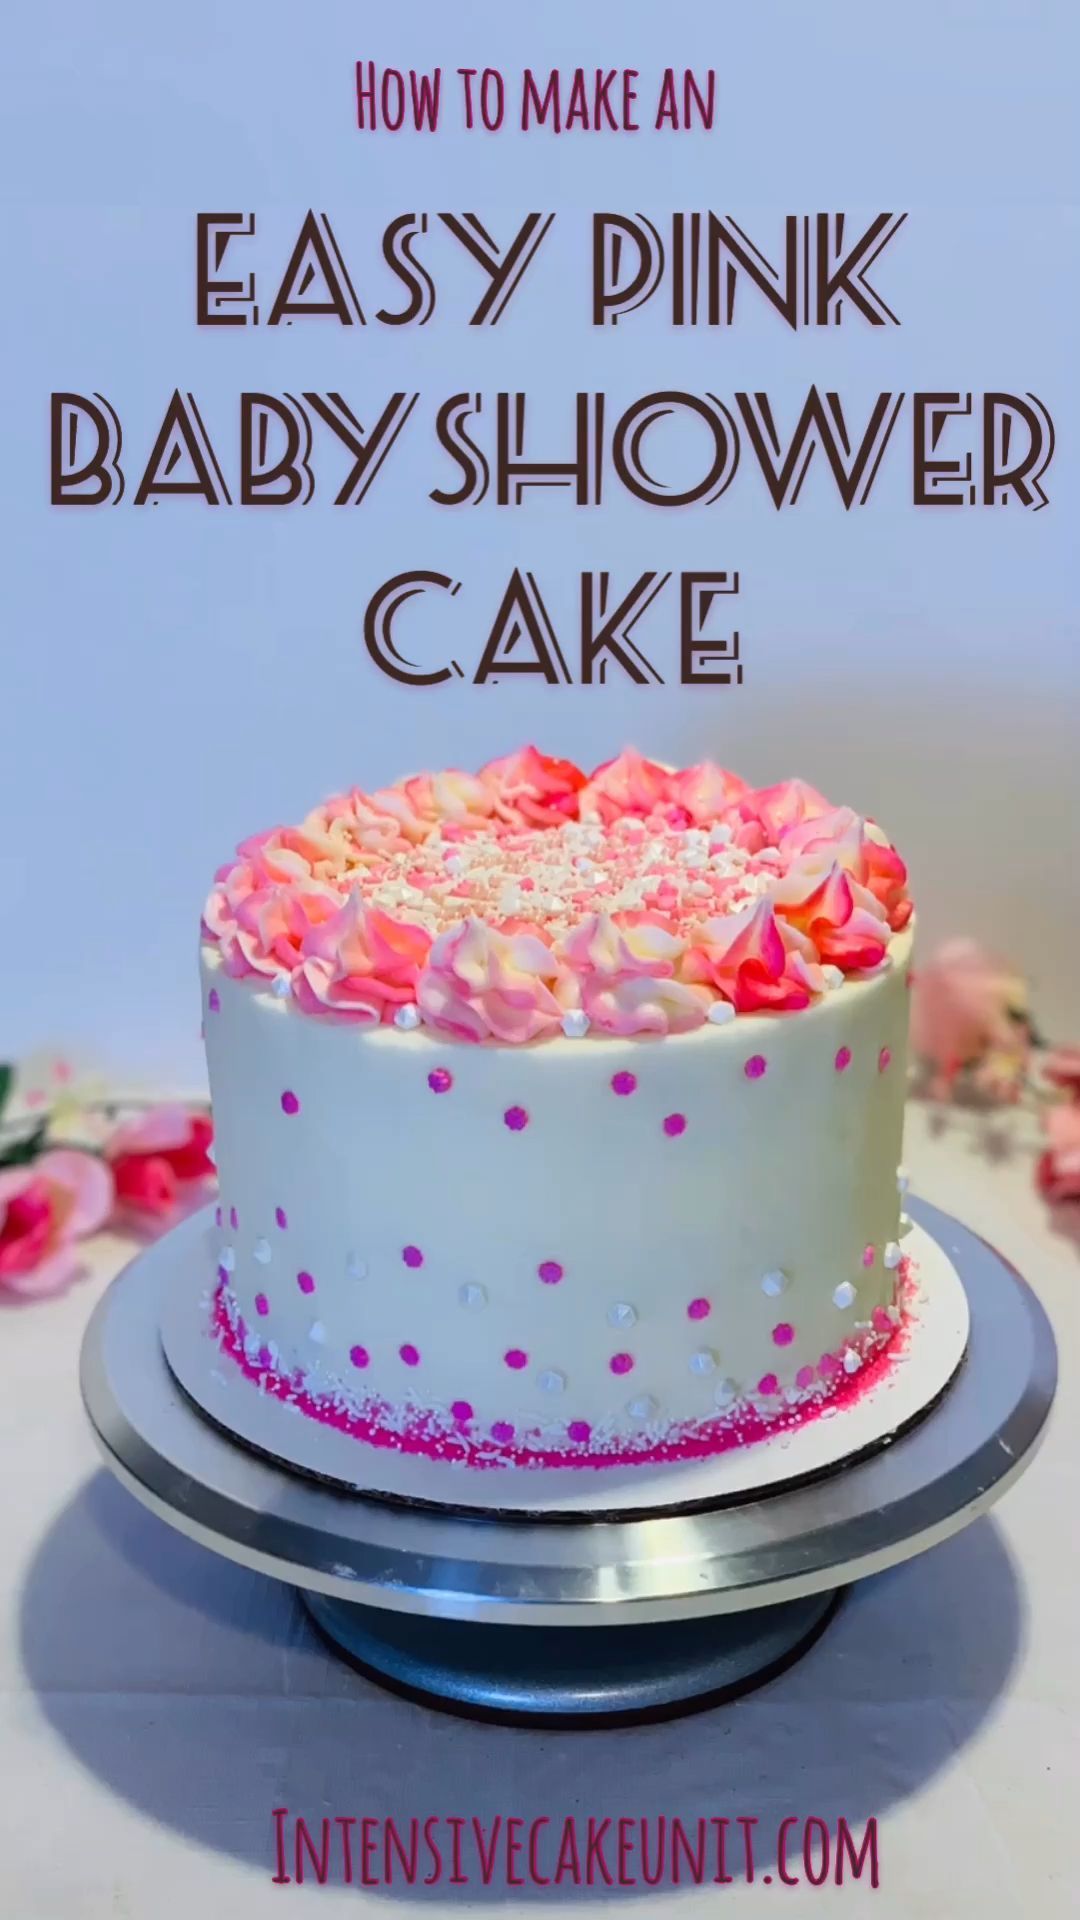 Easy Pink Baby Shower Cake -   15 cake Pink raspberry mousse ideas